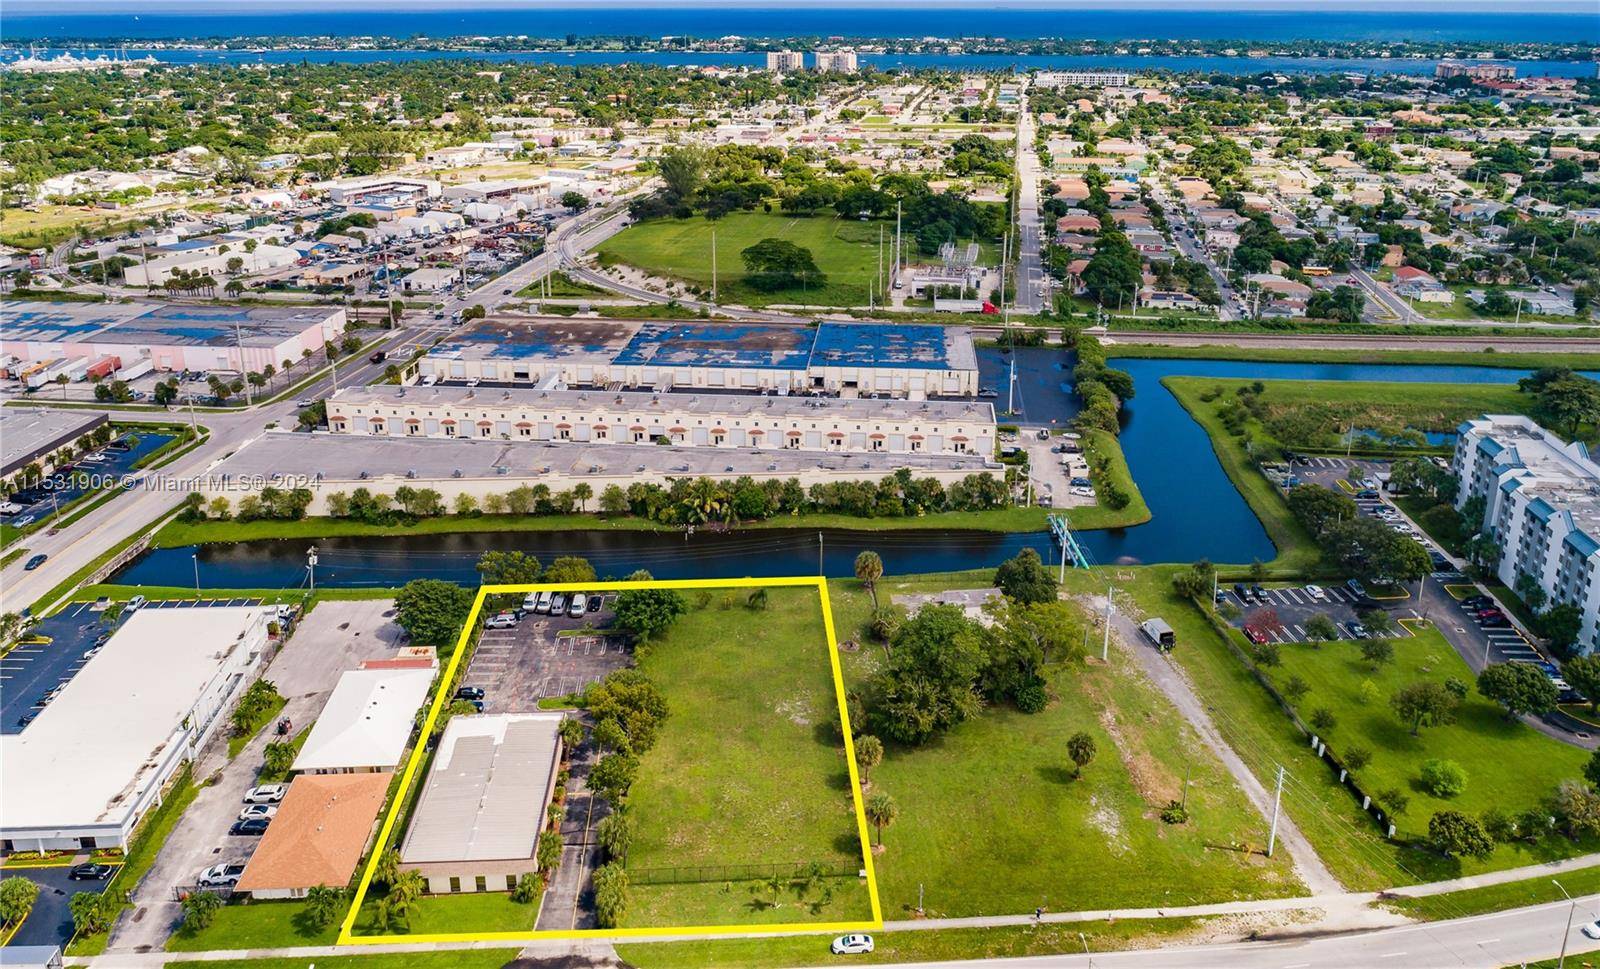 Proud to exclusively represent for sale 2460 2508 N Australian Ave in West Palm Beach.